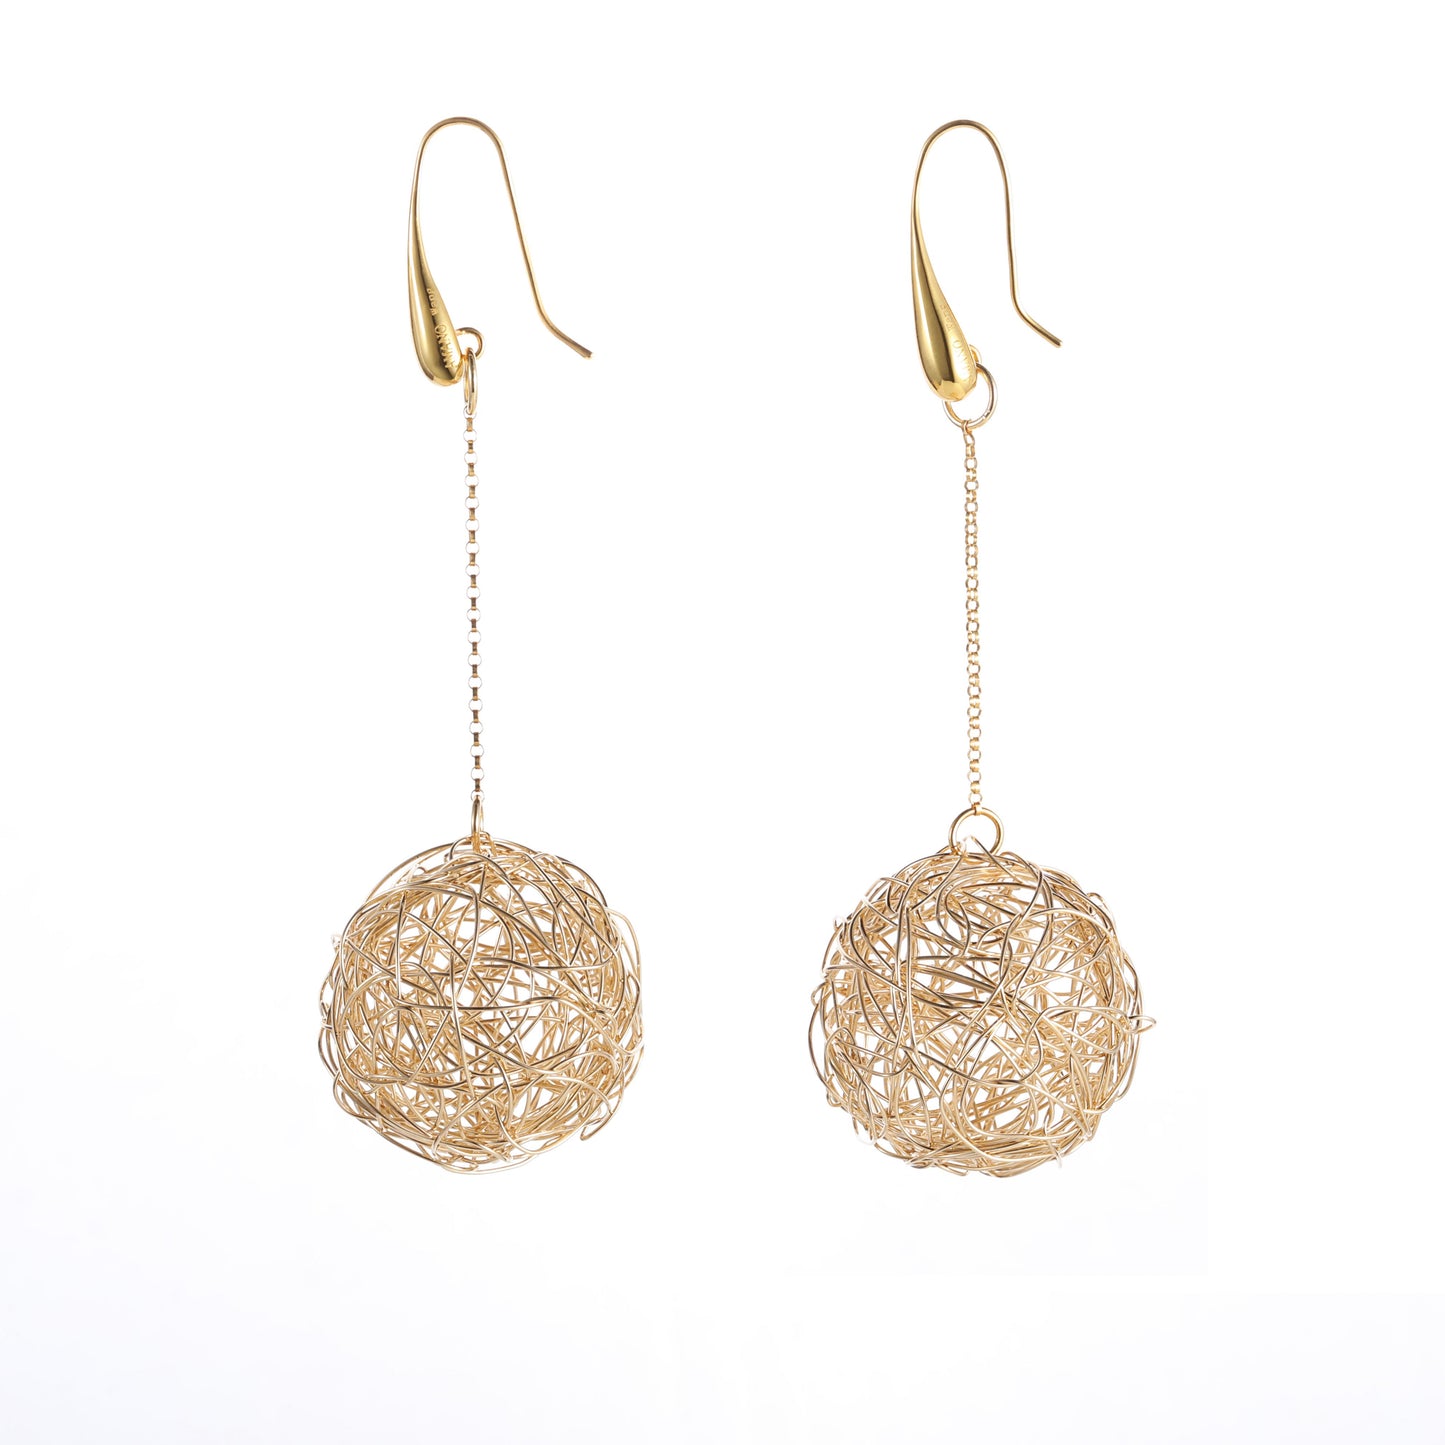 Texture Series - Gold Woven Bead Chain Pendant Earrings